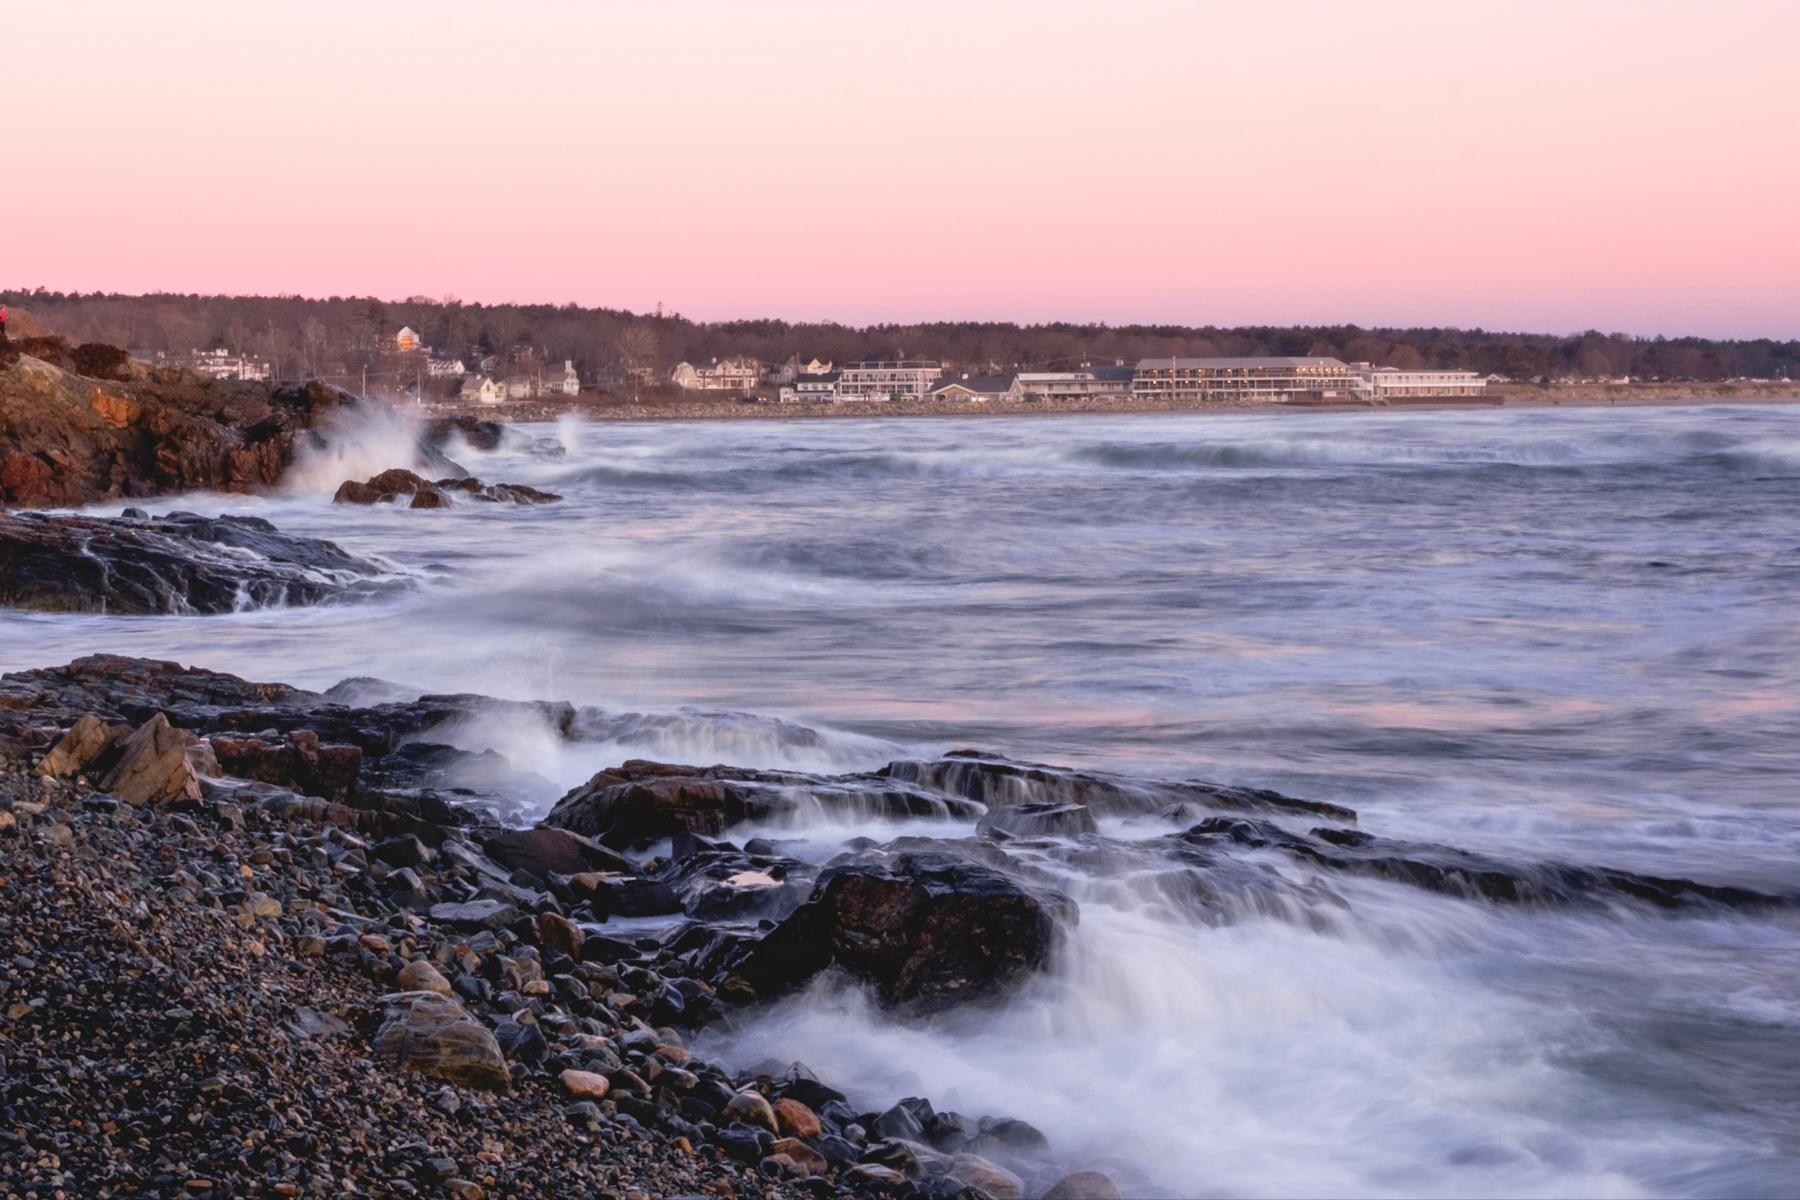 Seascape at sunrise with waves crashing against rocky shoreline, pebbly beach in foreground, and large waterfront buildings in the distance under a pink-hued sky.